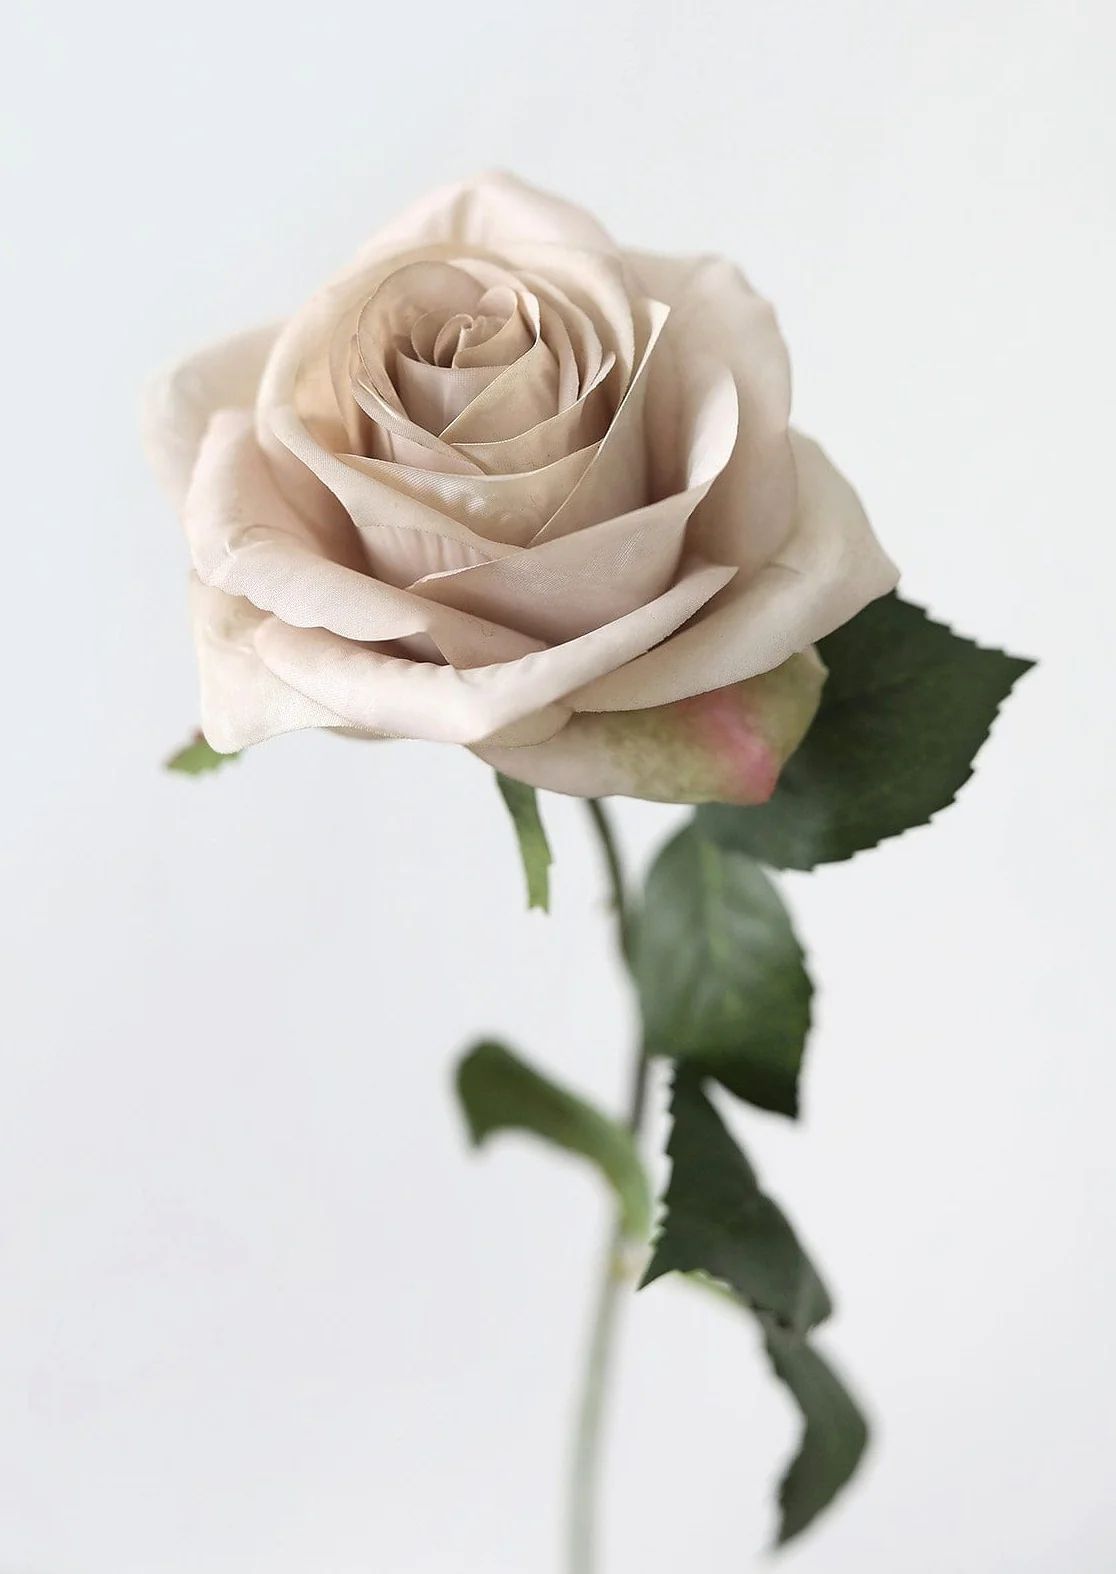 Fake Fall Flowers | Artificial Rose Stem in Taupe Beige | Afloral.com | Afloral